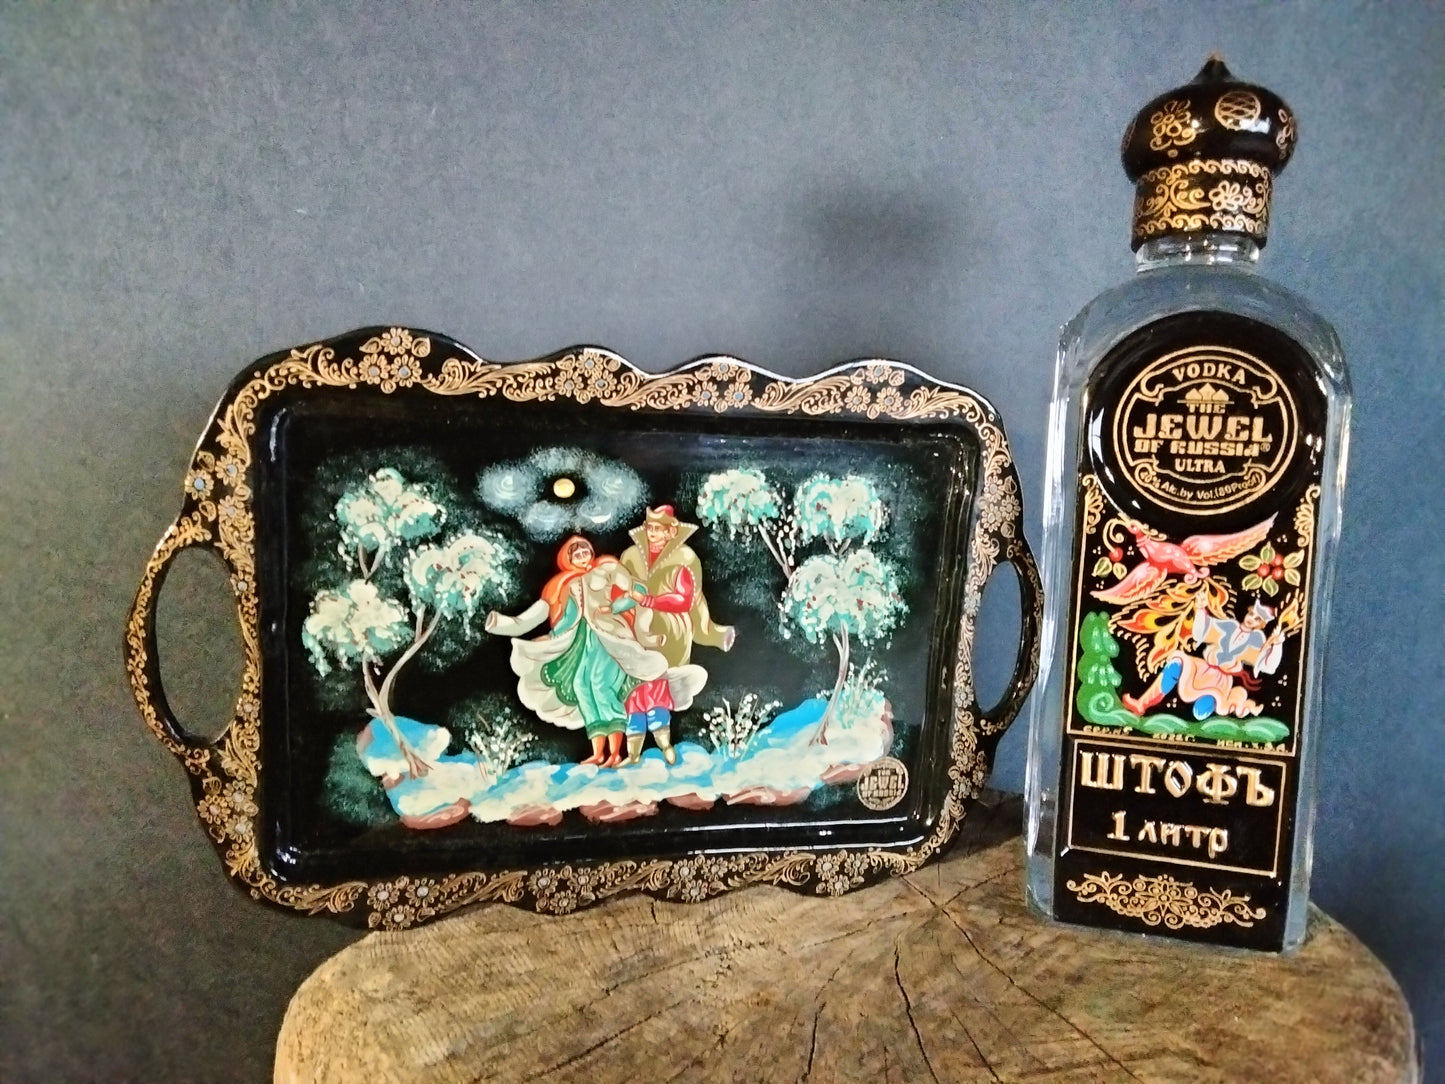 Teh Jewel Of Russia traditional hand painted Palekh lacquer miniature vodka shot serving tray